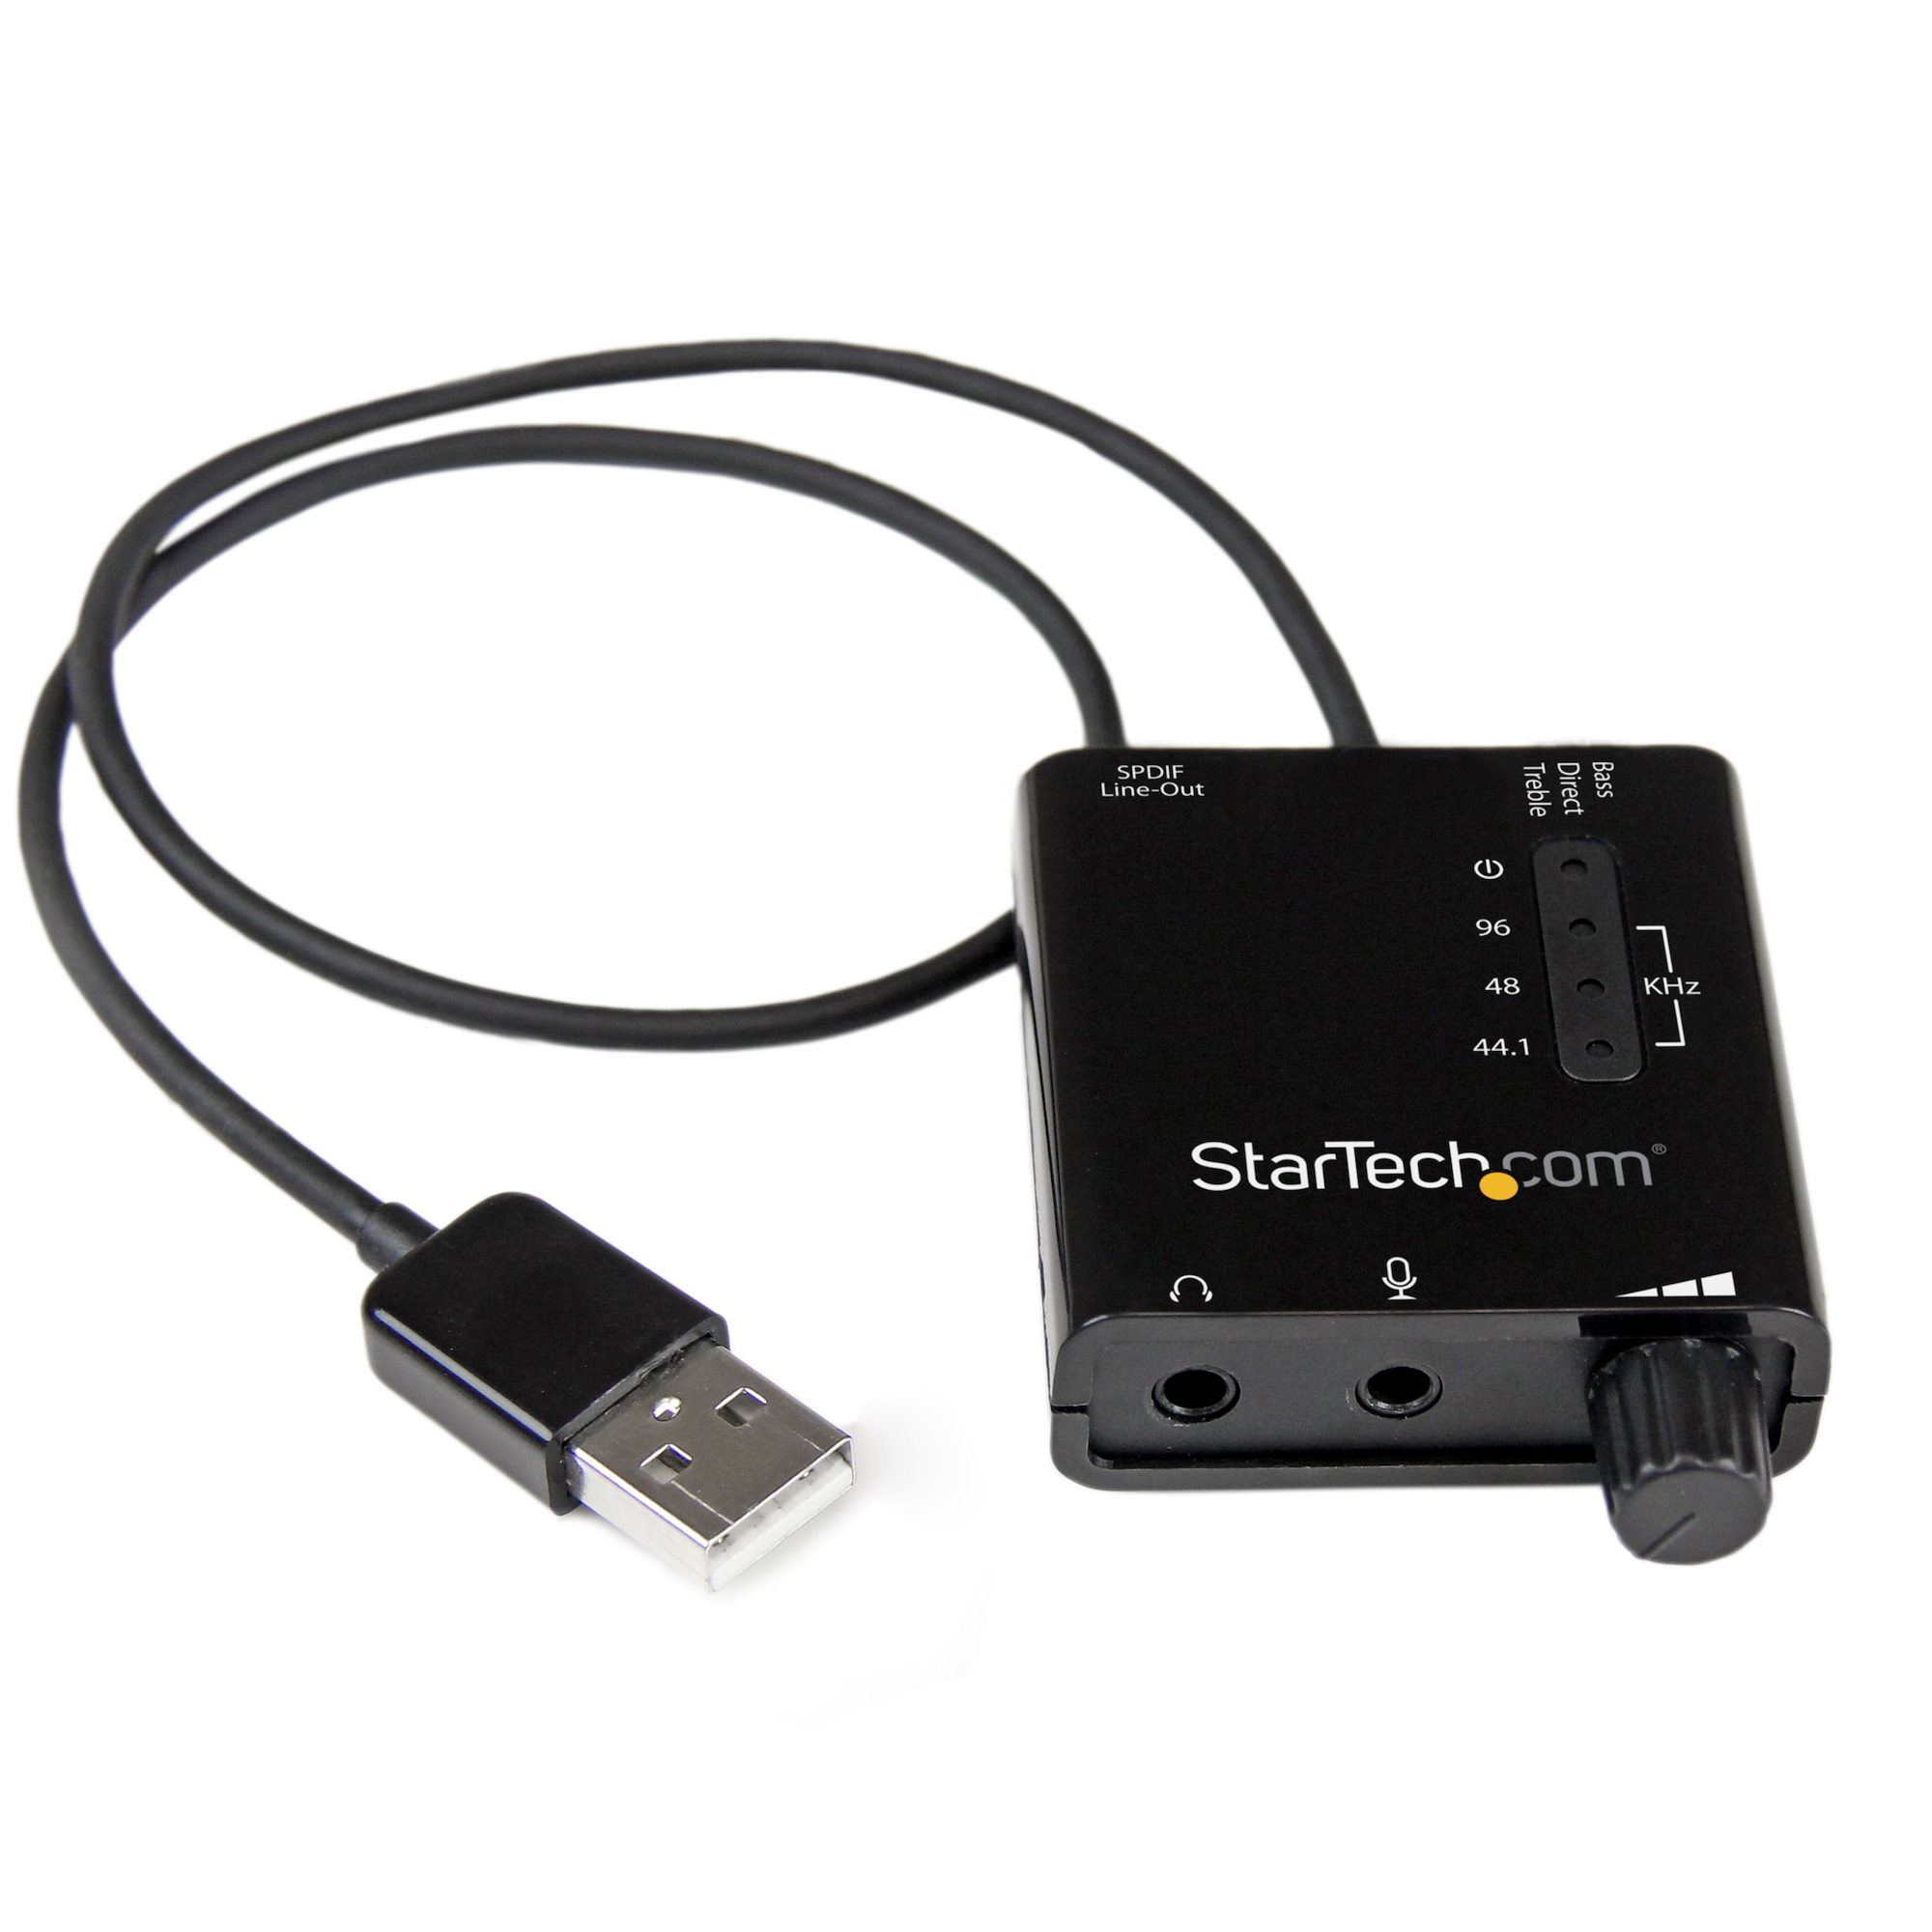 StarTech.com USB Sound Card W/ SPDIF Digital Audio & Stereo Mic - External Sound Card For Laptop Or PC - SPDIF Output (ICUSBAUDIO2D) - Sound Card - 24-bit - 96 KHz - Stereo - USB 2.0 - For P/ - C2000